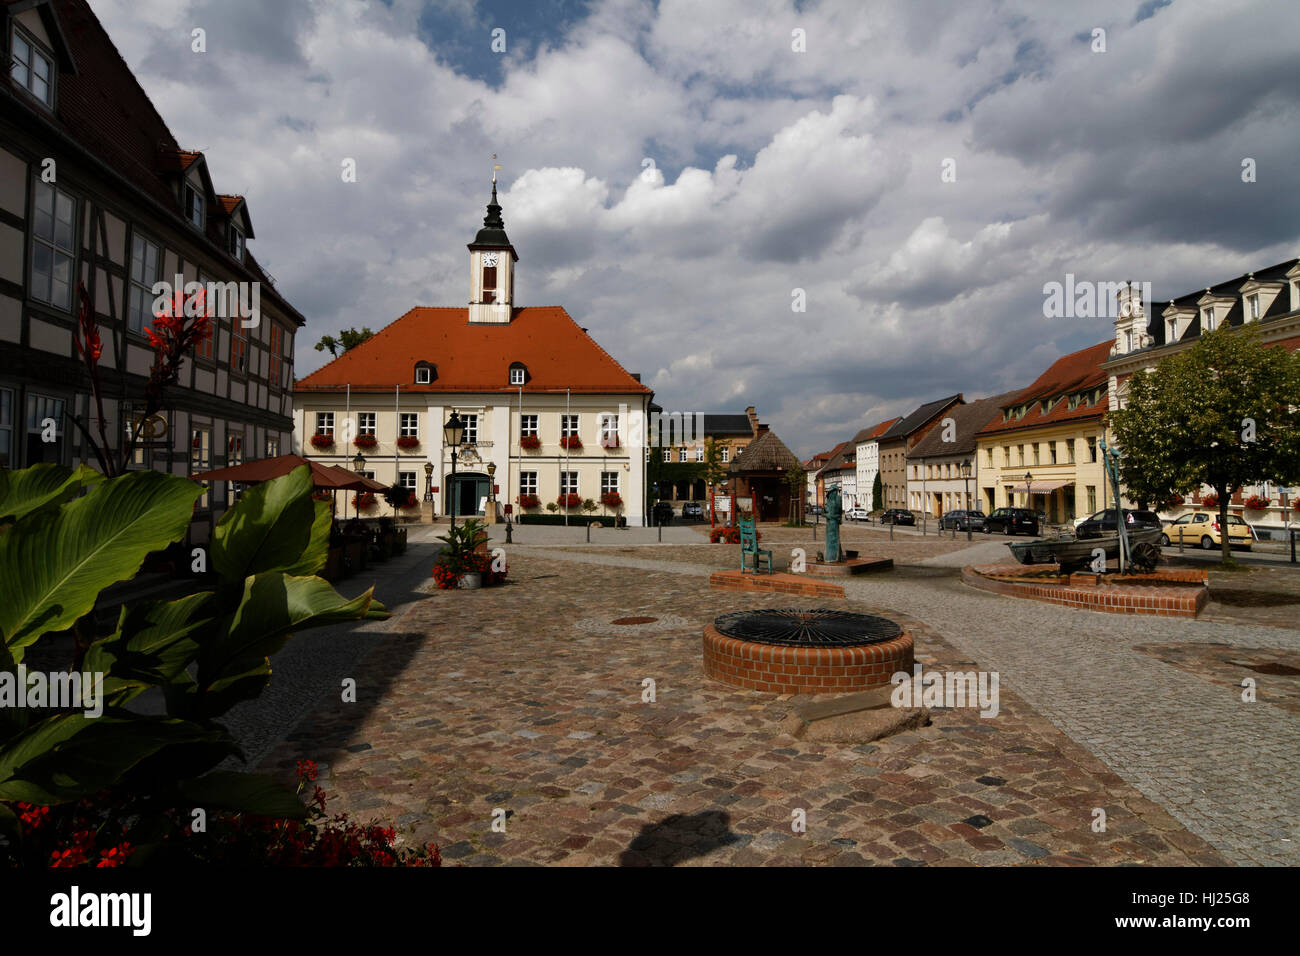 city, town, monument, brandenburg, style of construction, architecture, Stock Photo